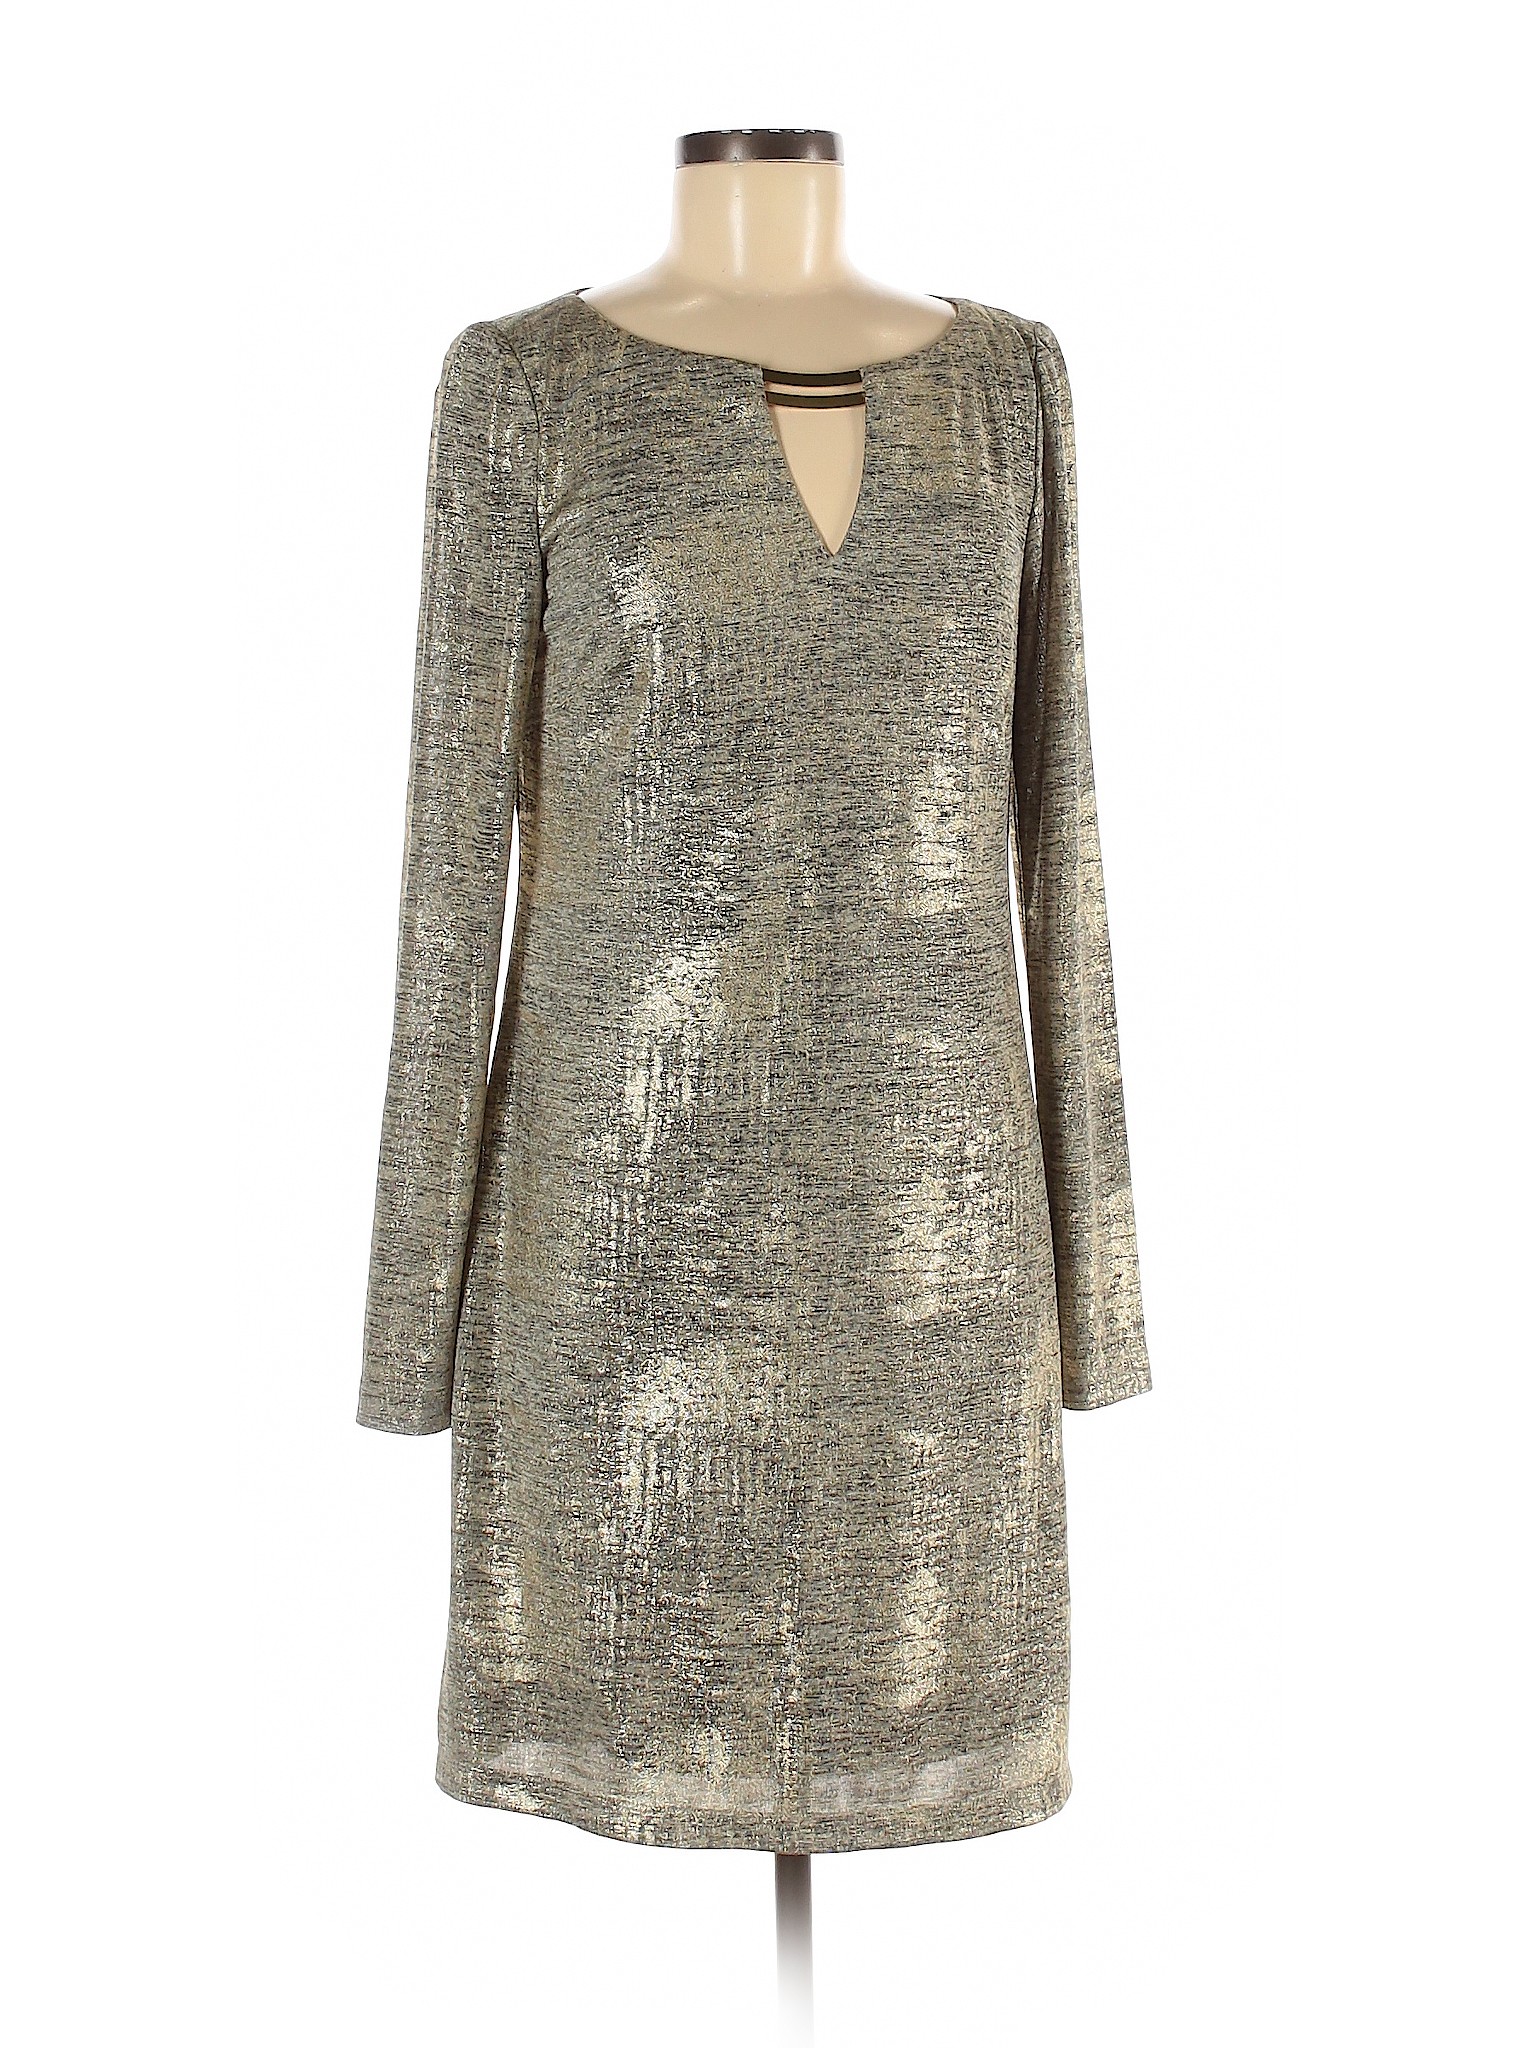 Vince Camuto Women Gold Casual Dress 8 | eBay